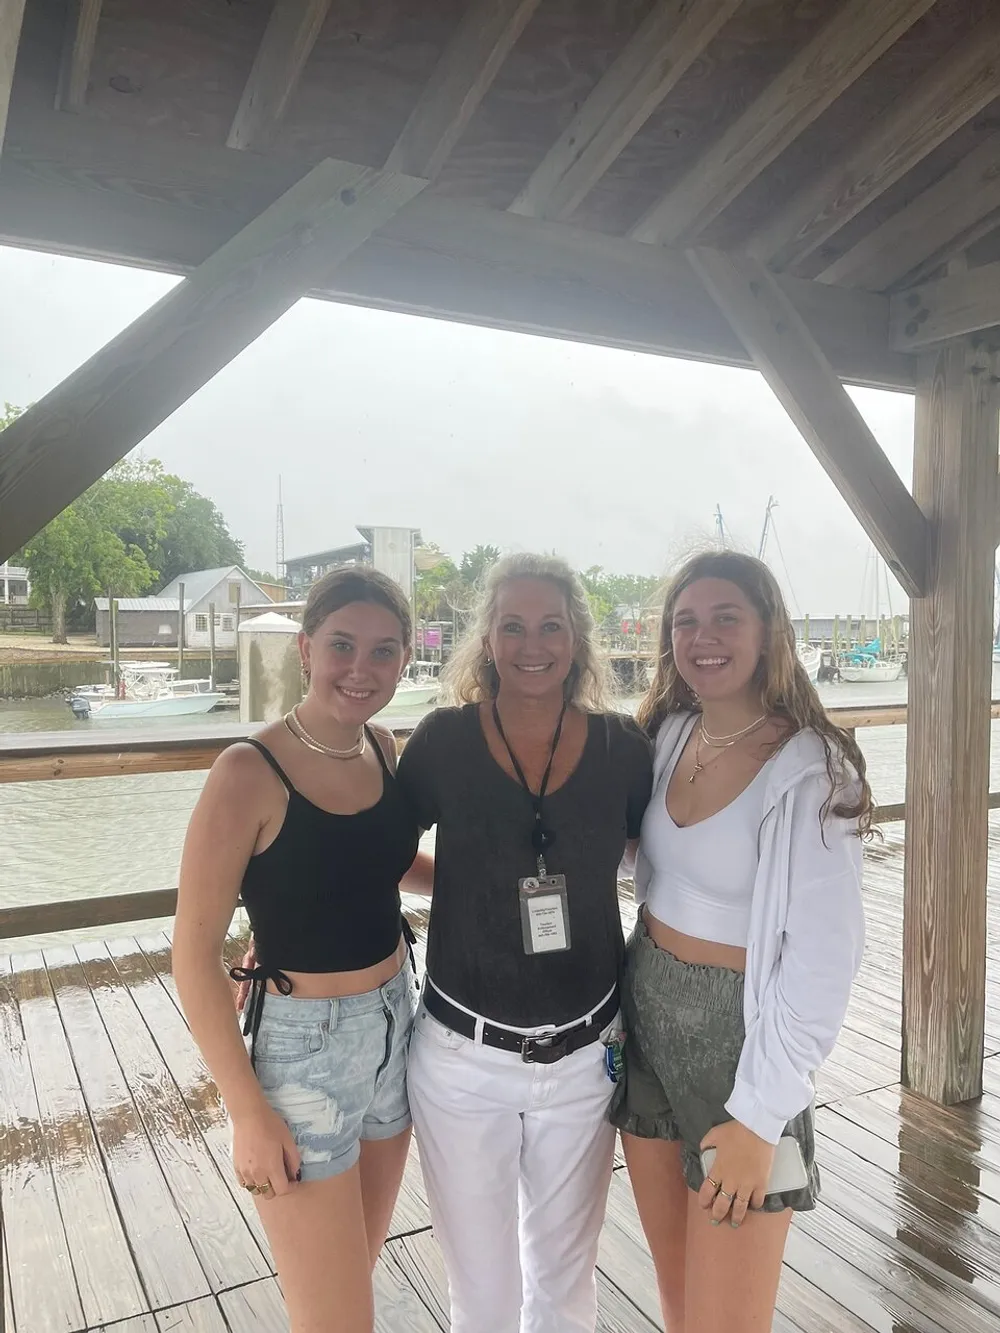 Three smiling people are standing under a wooden shelter by a marina on a cloudy day